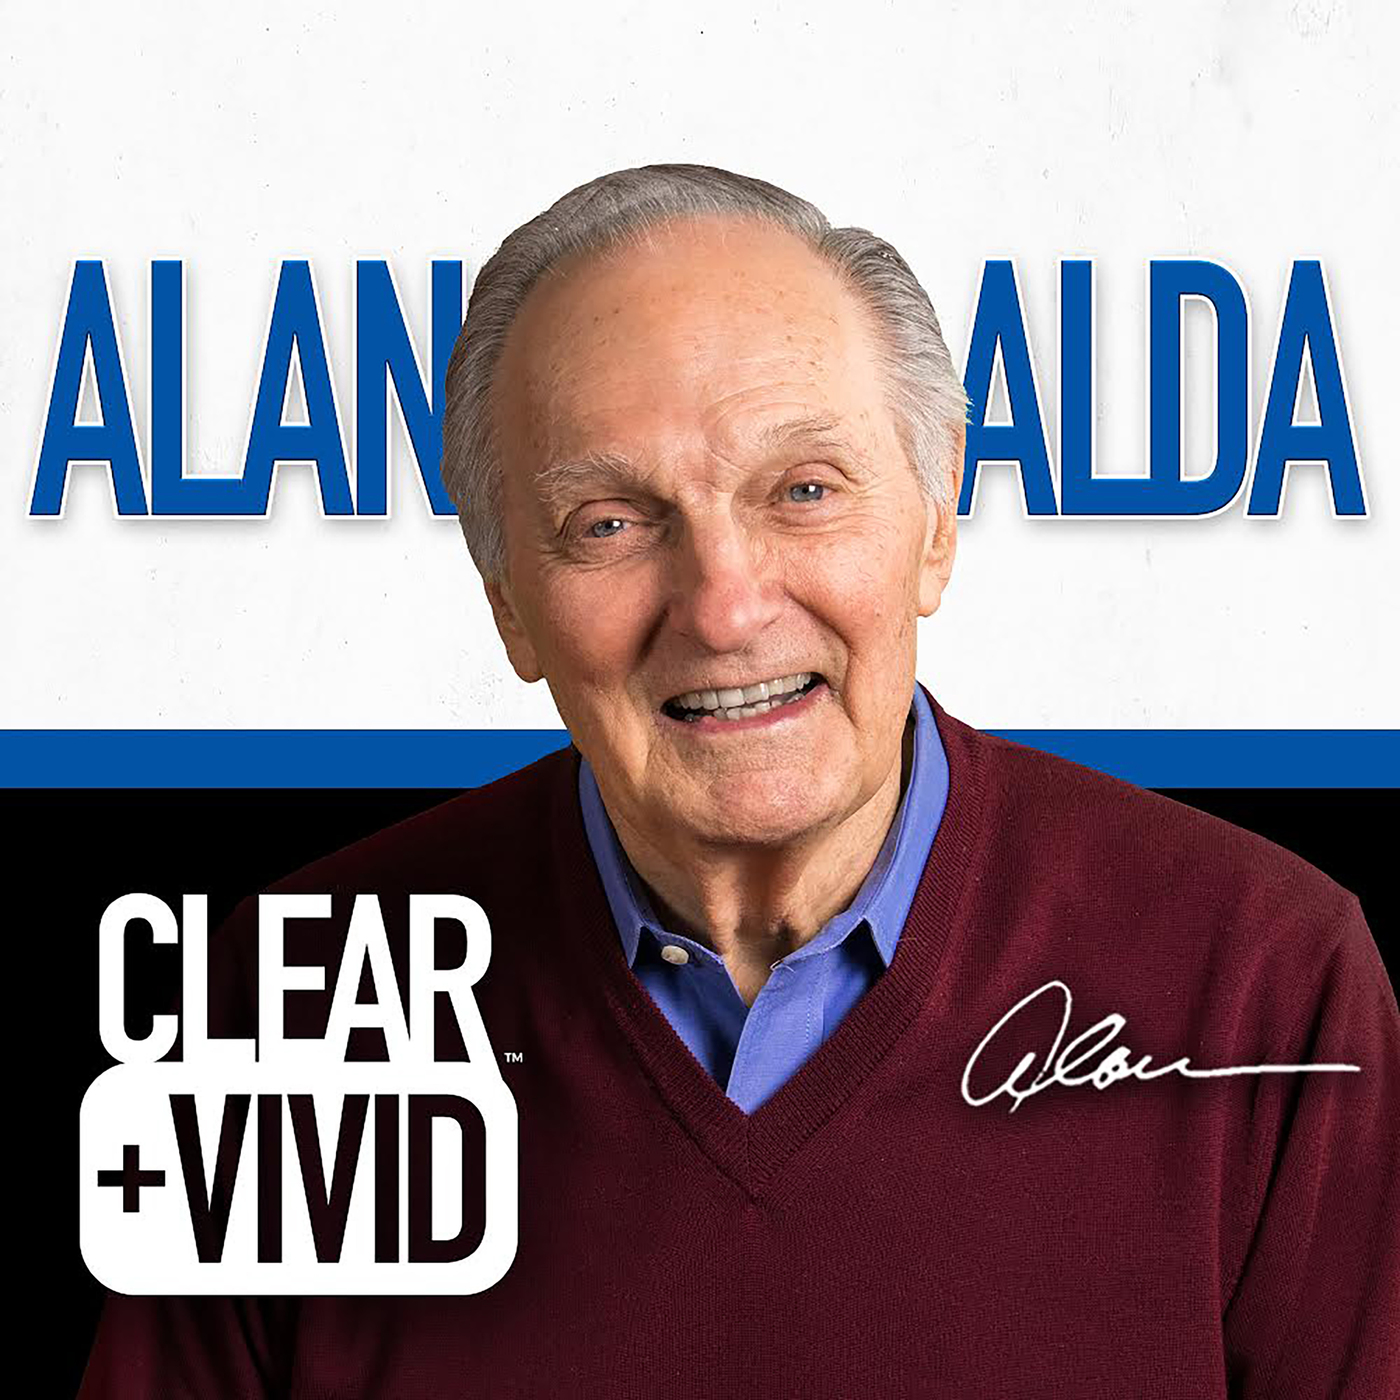 Clear+Vivid with Alan Alda cover art